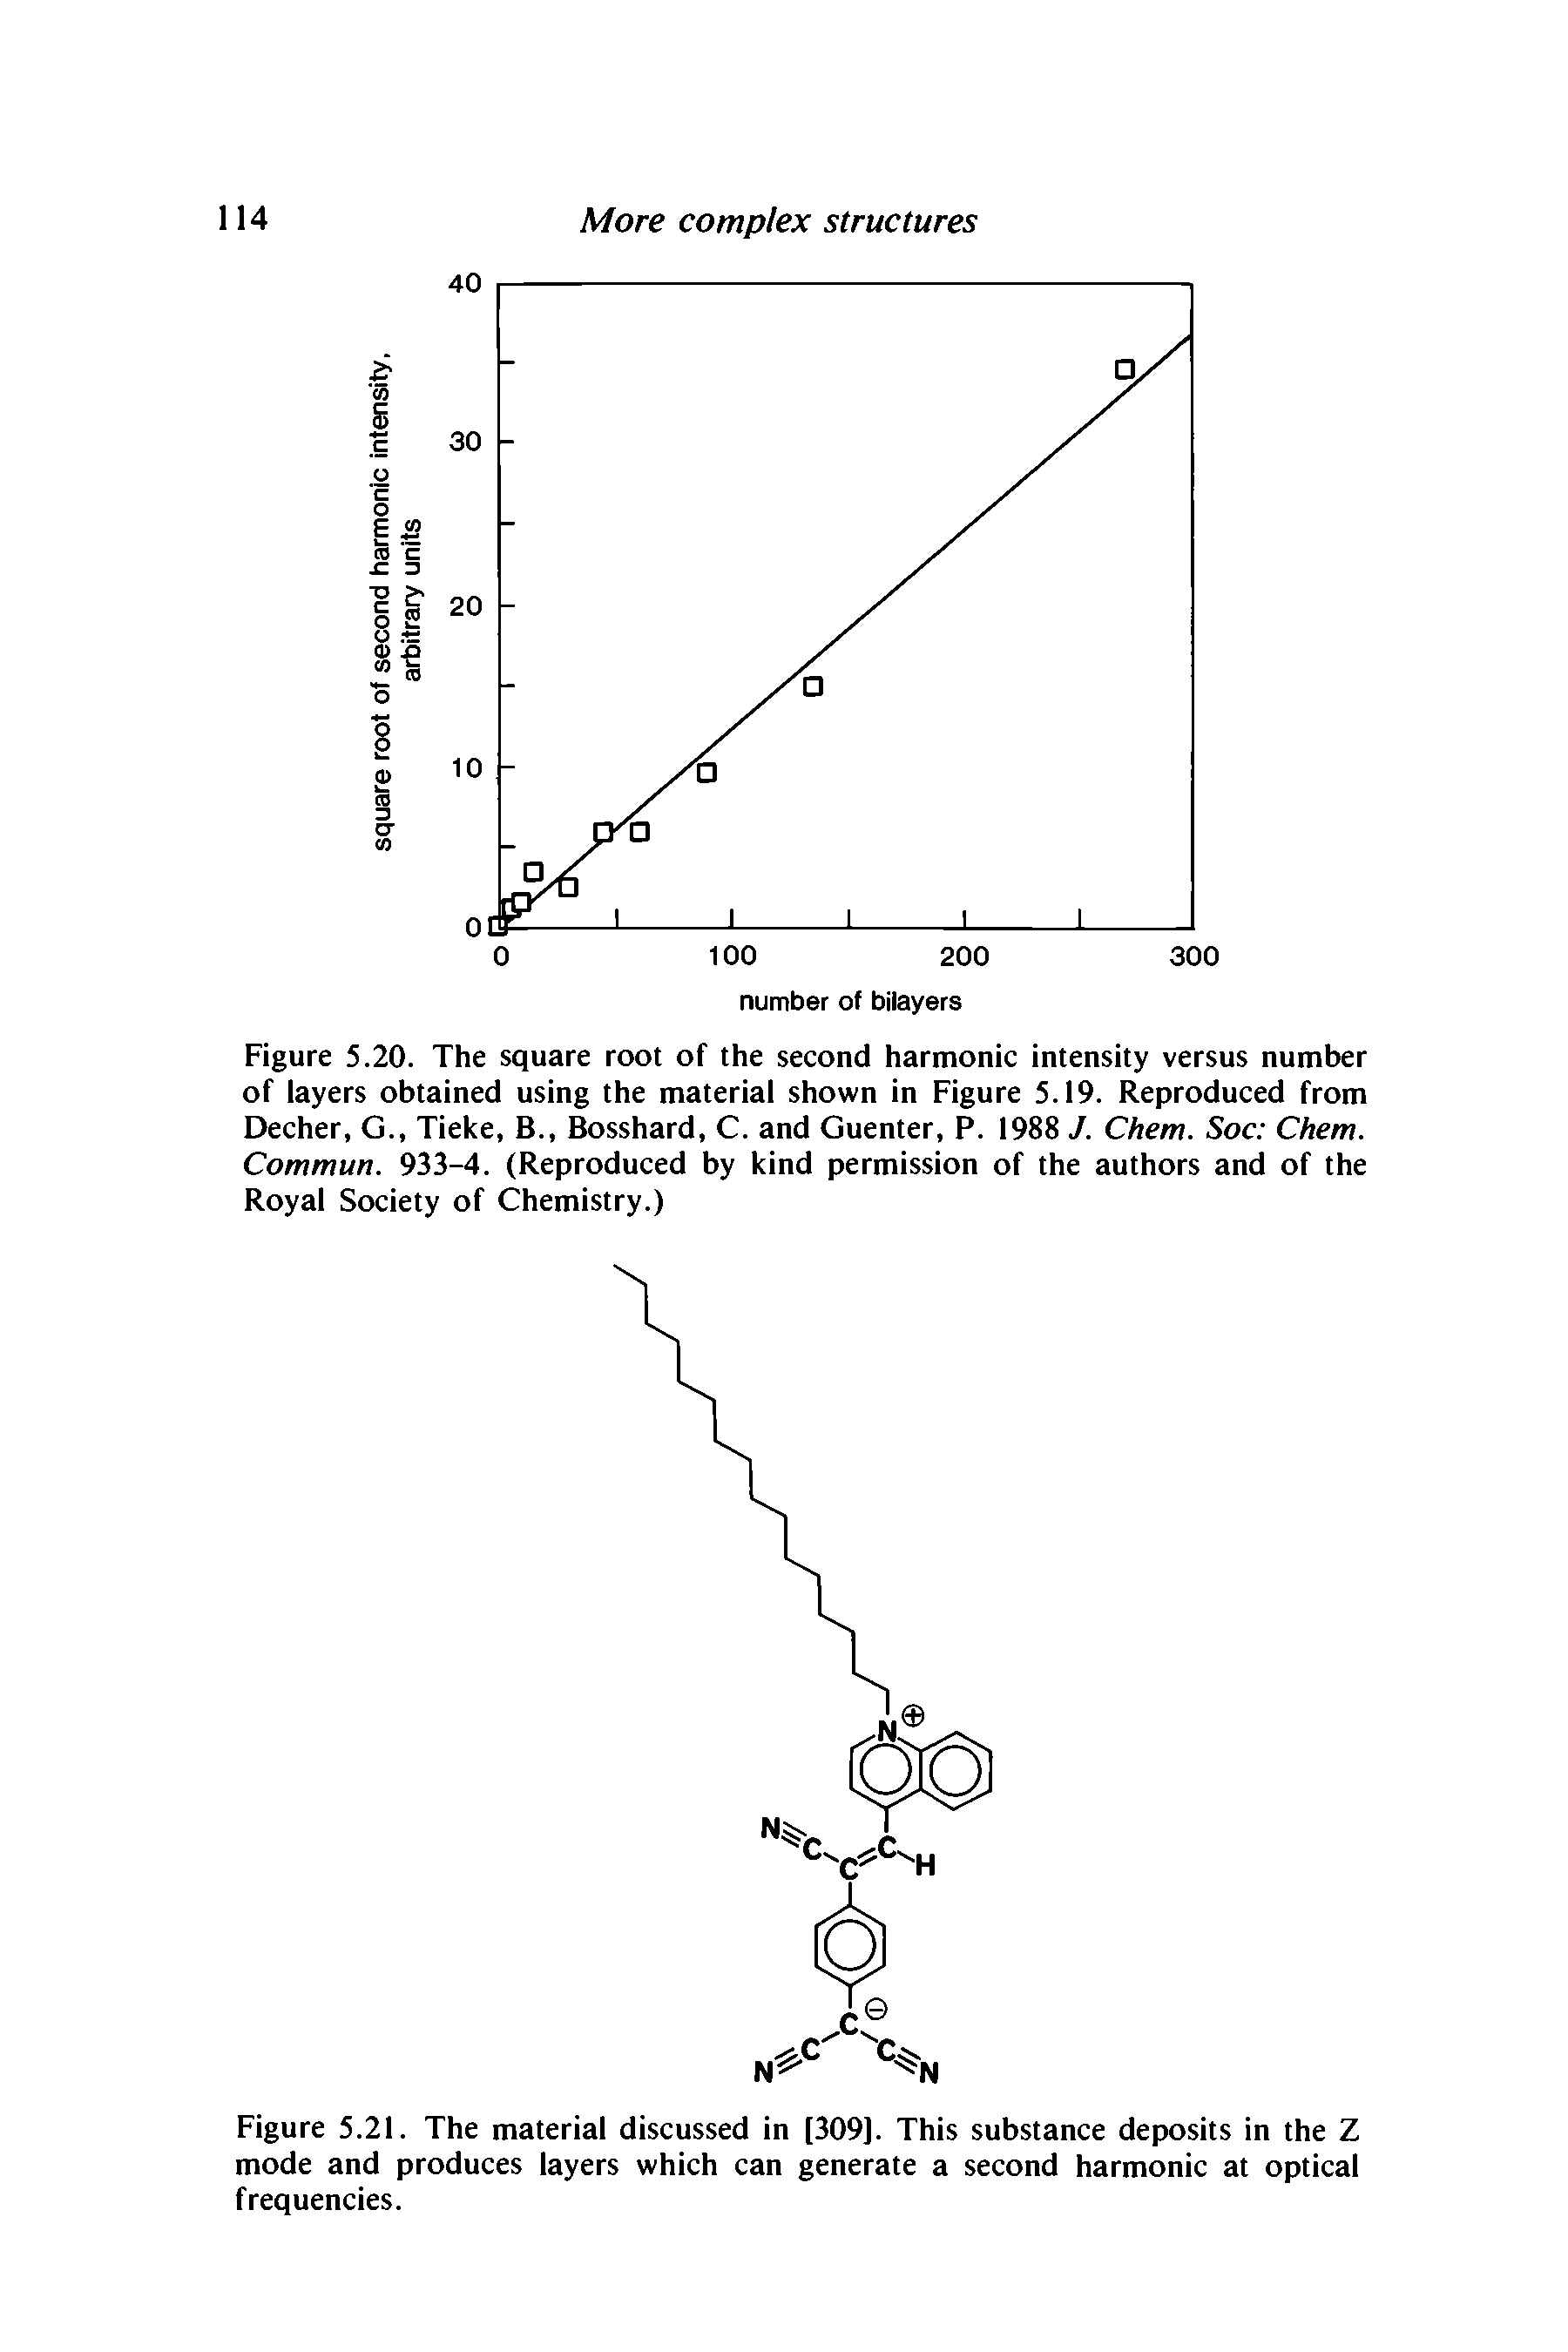 Figure 5.20. The square root of the second harmonic intensity versus number of layers obtained using the material shown in Figure 5.19. Reproduced from Decher, G., Tieke, B., Bosshard, C. and Guenter, P. 1988 J. Chem. Soc Chem. Commun. 933-4. (Reproduced by kind permission of the authors and of the Royal Society of Chemistry.)...